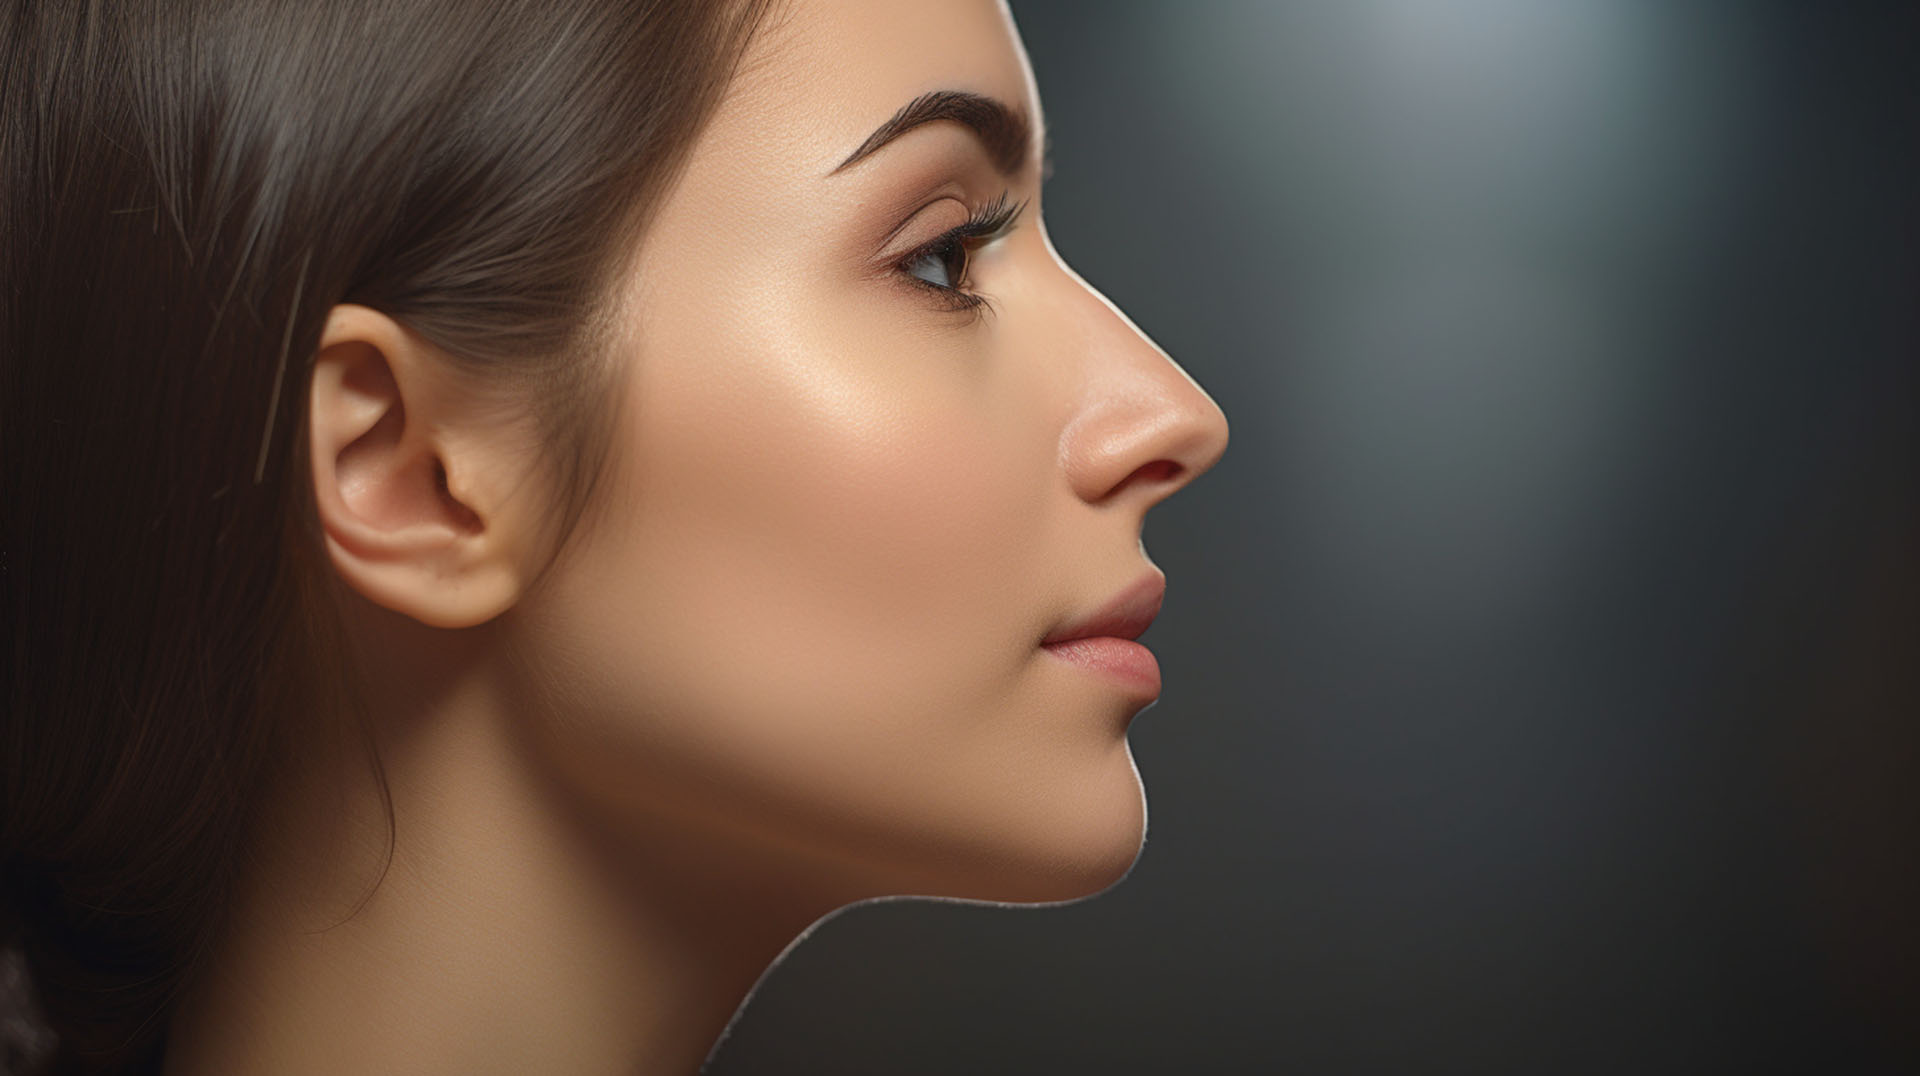 Nose Surgery in Simcoe, ON